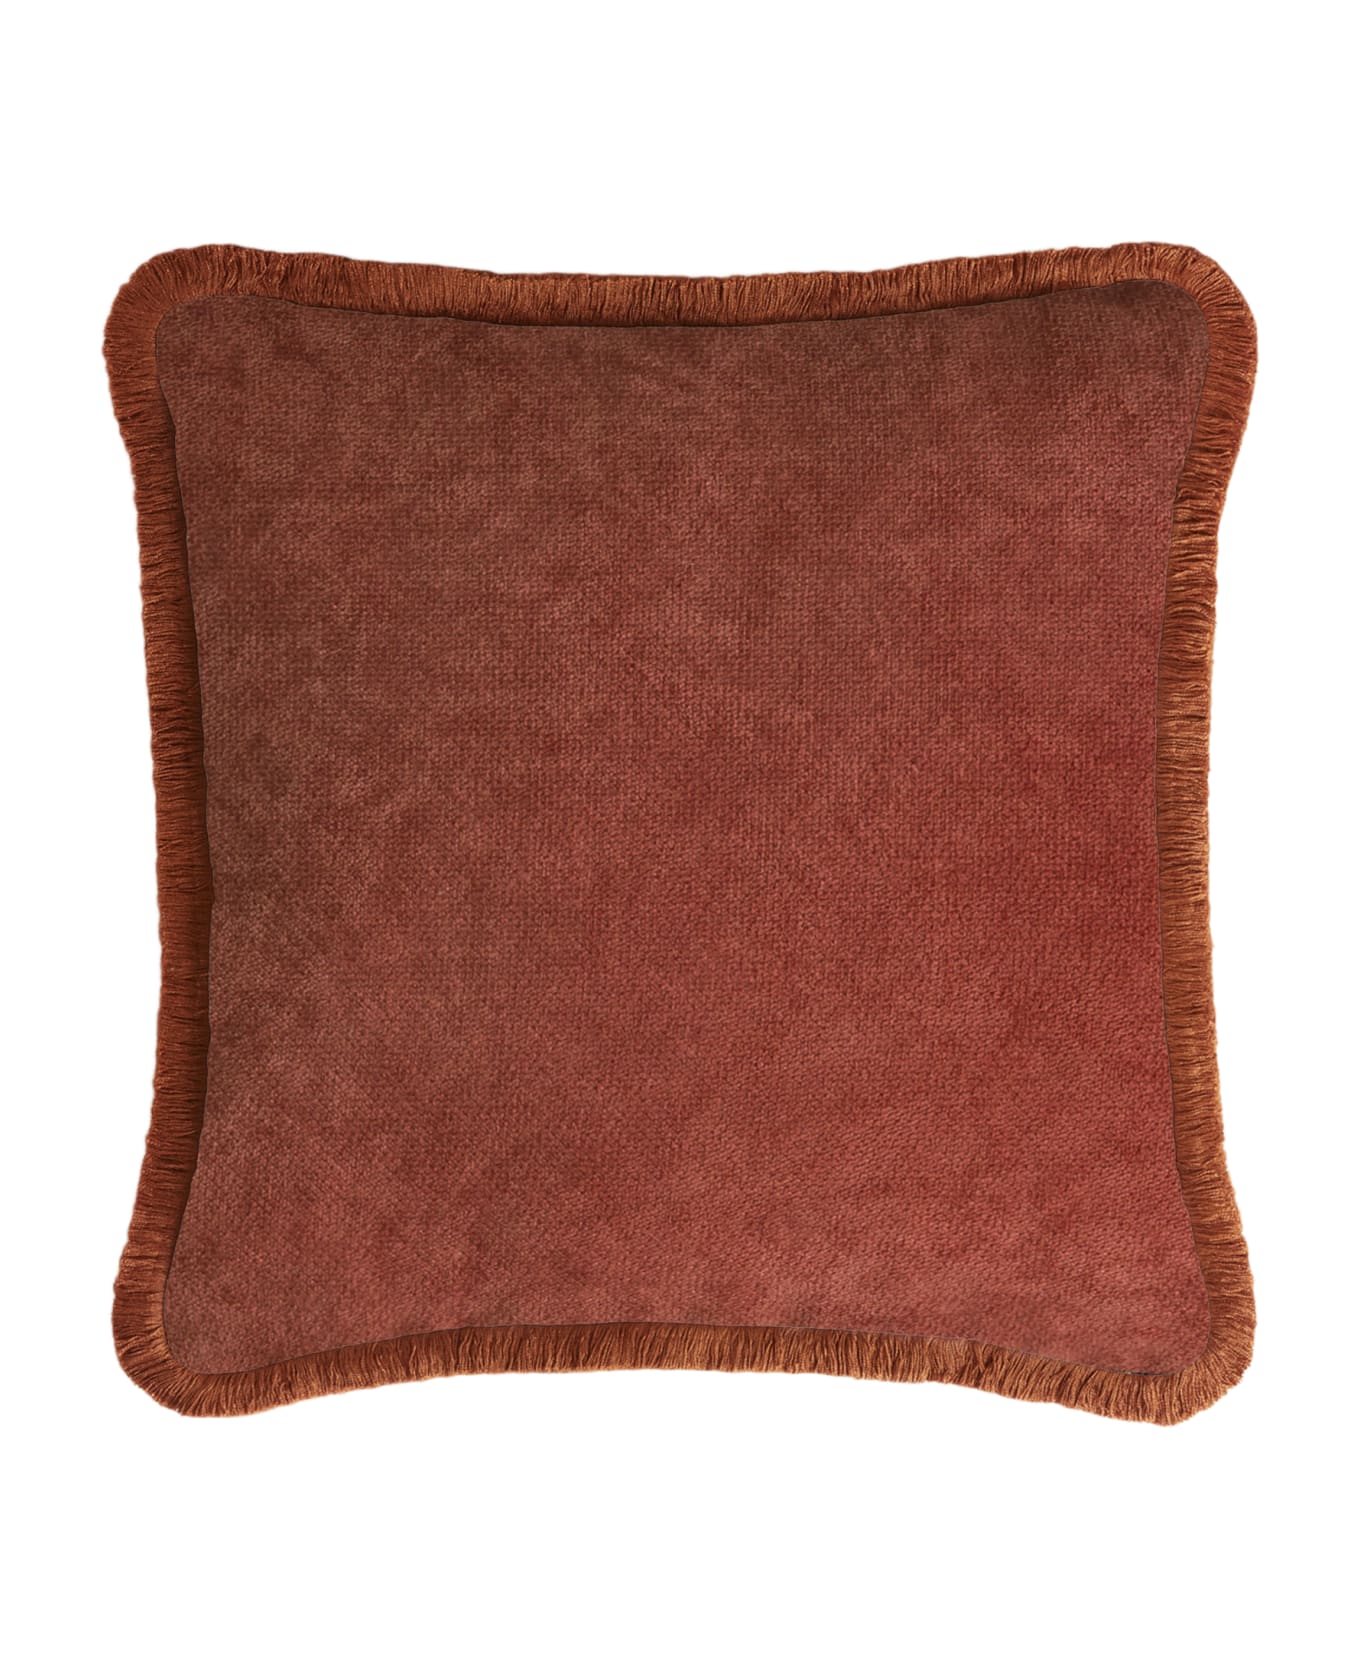 Lo Decor Happy Pillow   Brick Red With Brick Red Fringes - brick red, brick red クッション